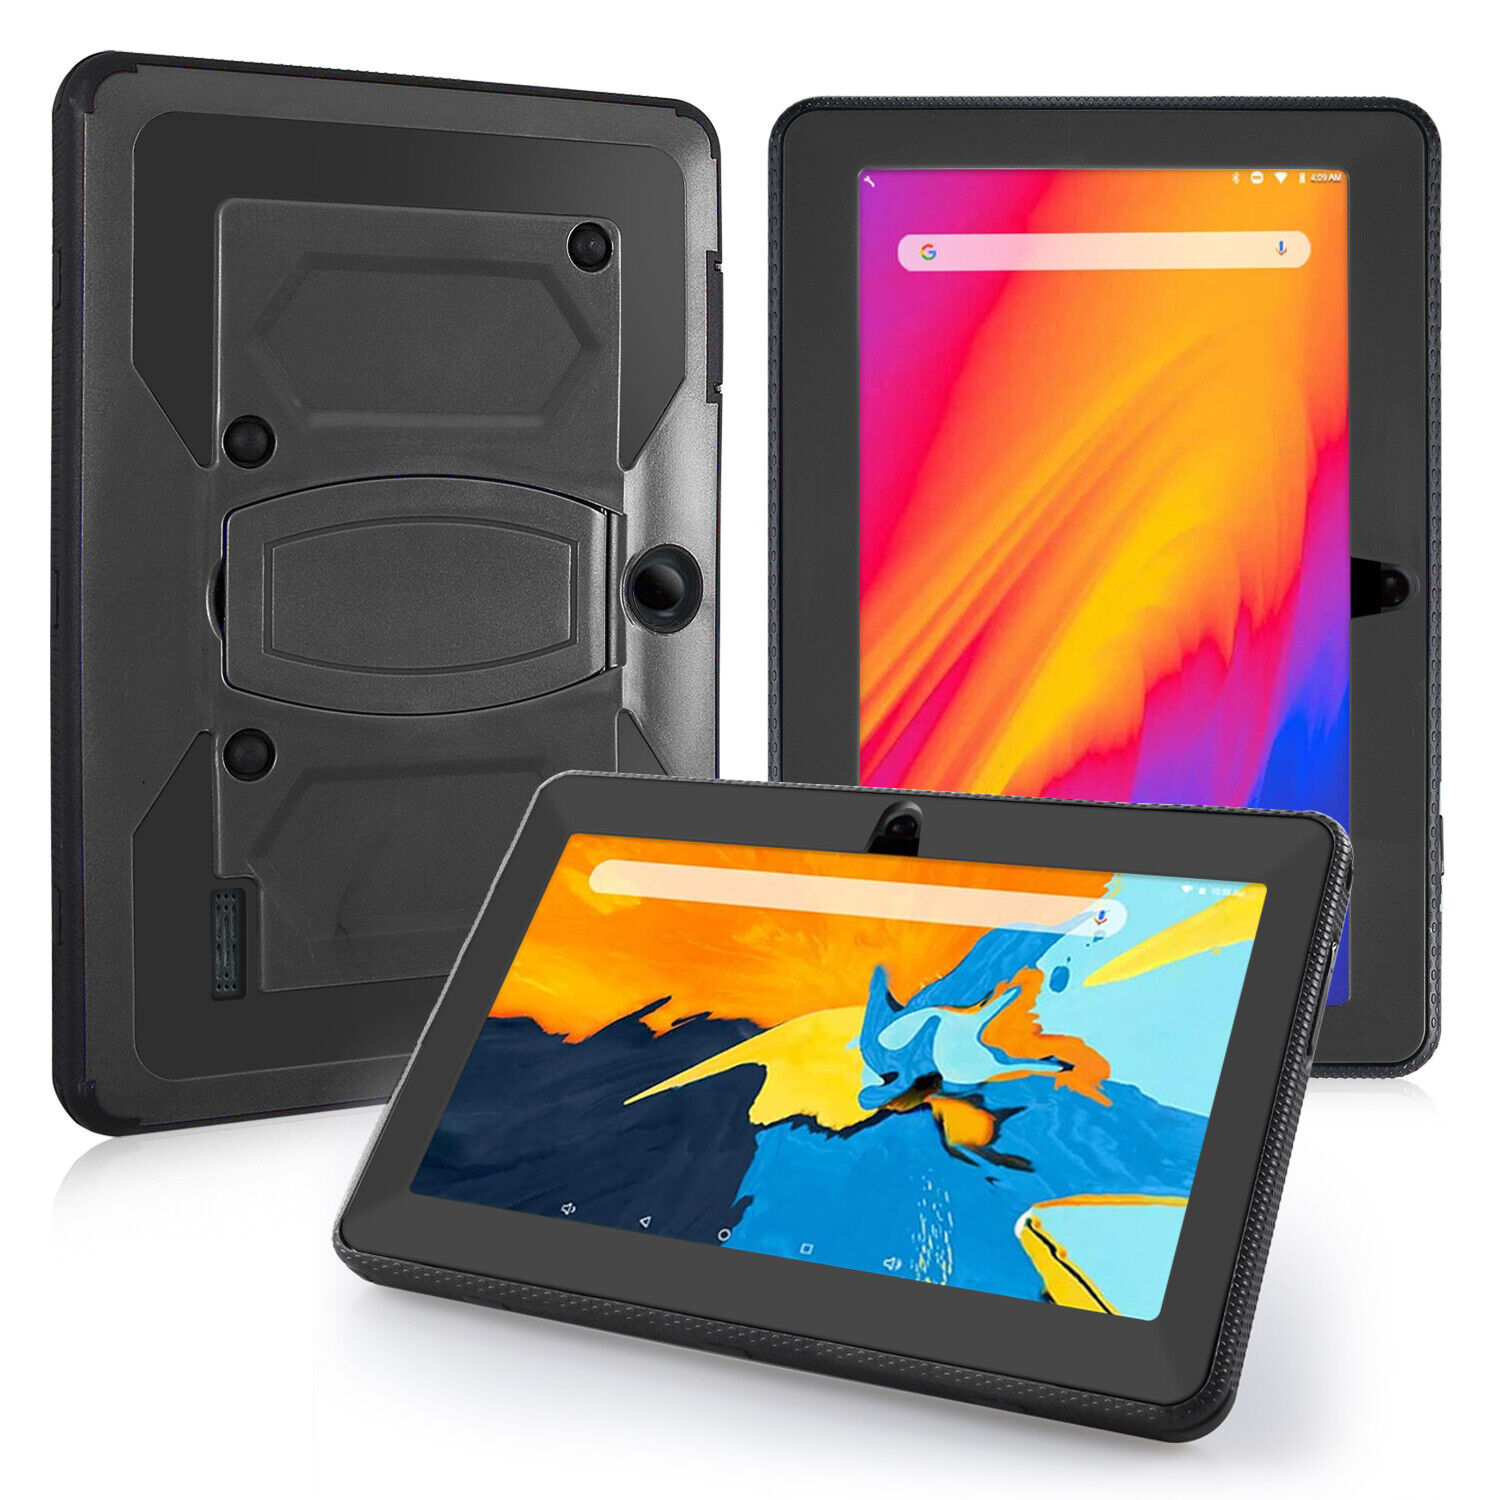 For Dragon Touch Y88X Pro、SIXGO Kids、ZONKO 7 inch Tab Case Hard Back Shockproof